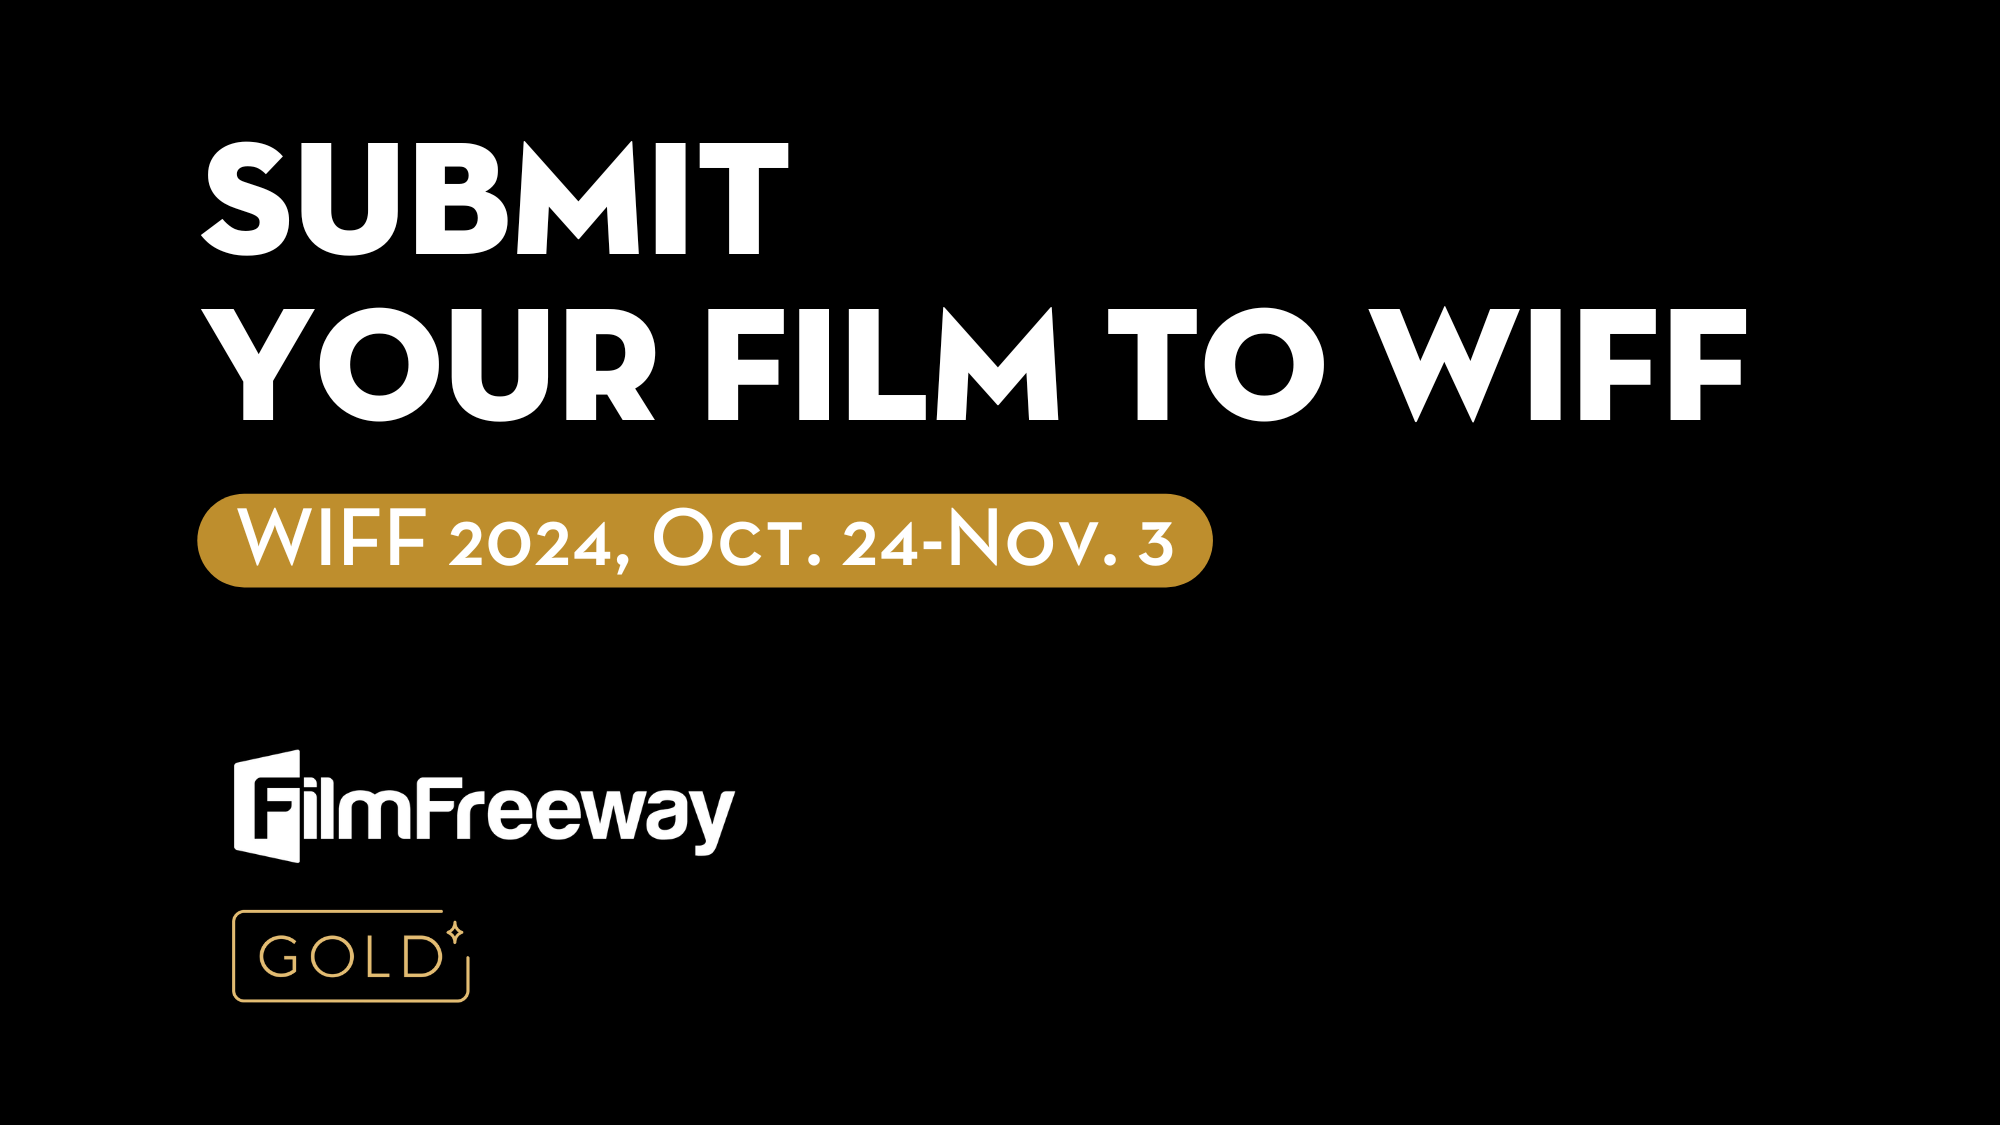 WIFF OPENS SUBMISSIONS FOR THE 2024 FESTIVAL